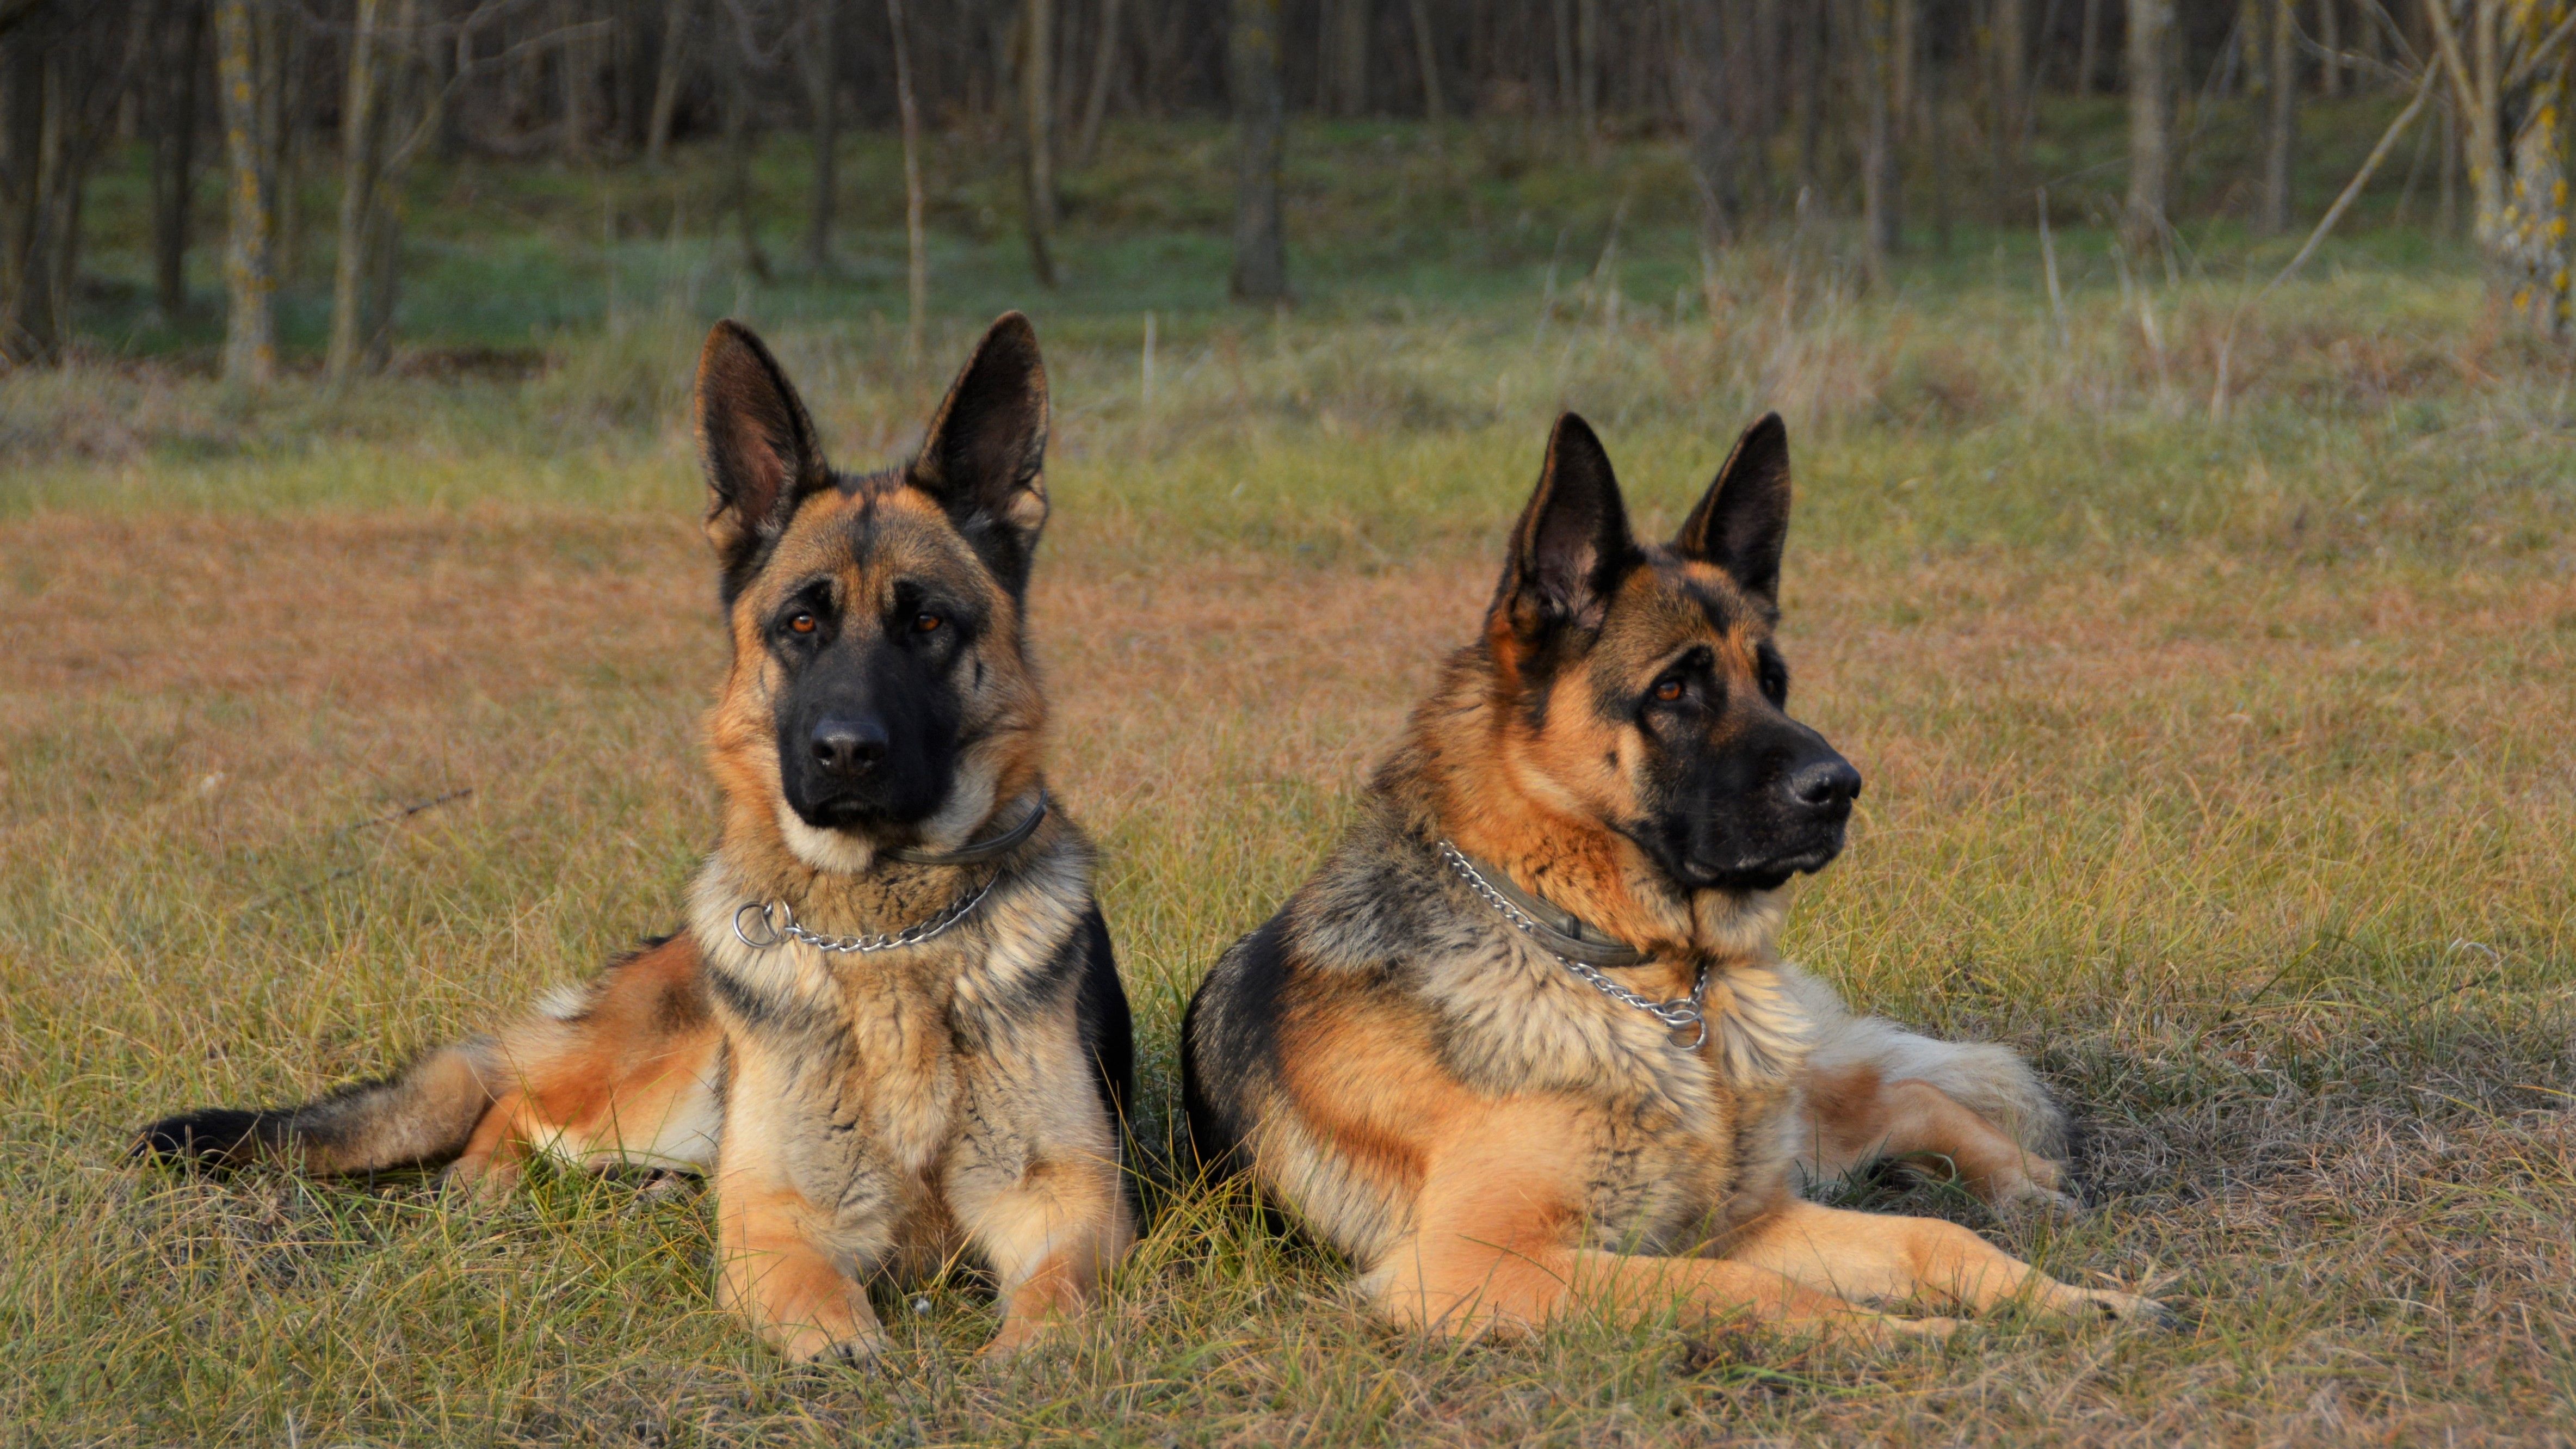 awesome looking dogs